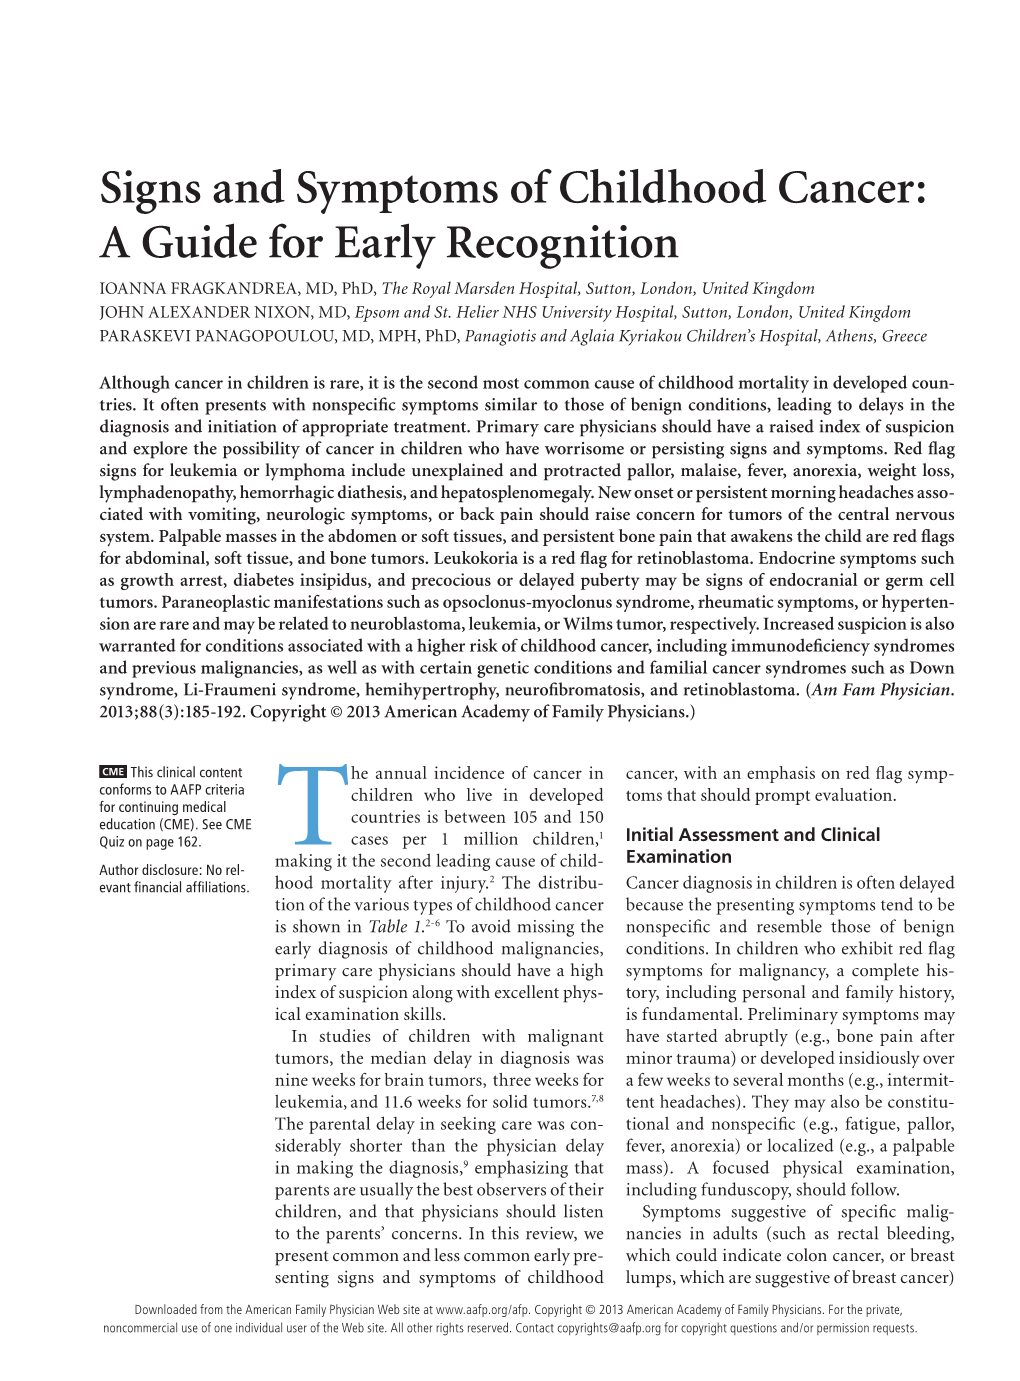 Signs and Symptoms of Childhood Cancer: a Guide for Early Recognition